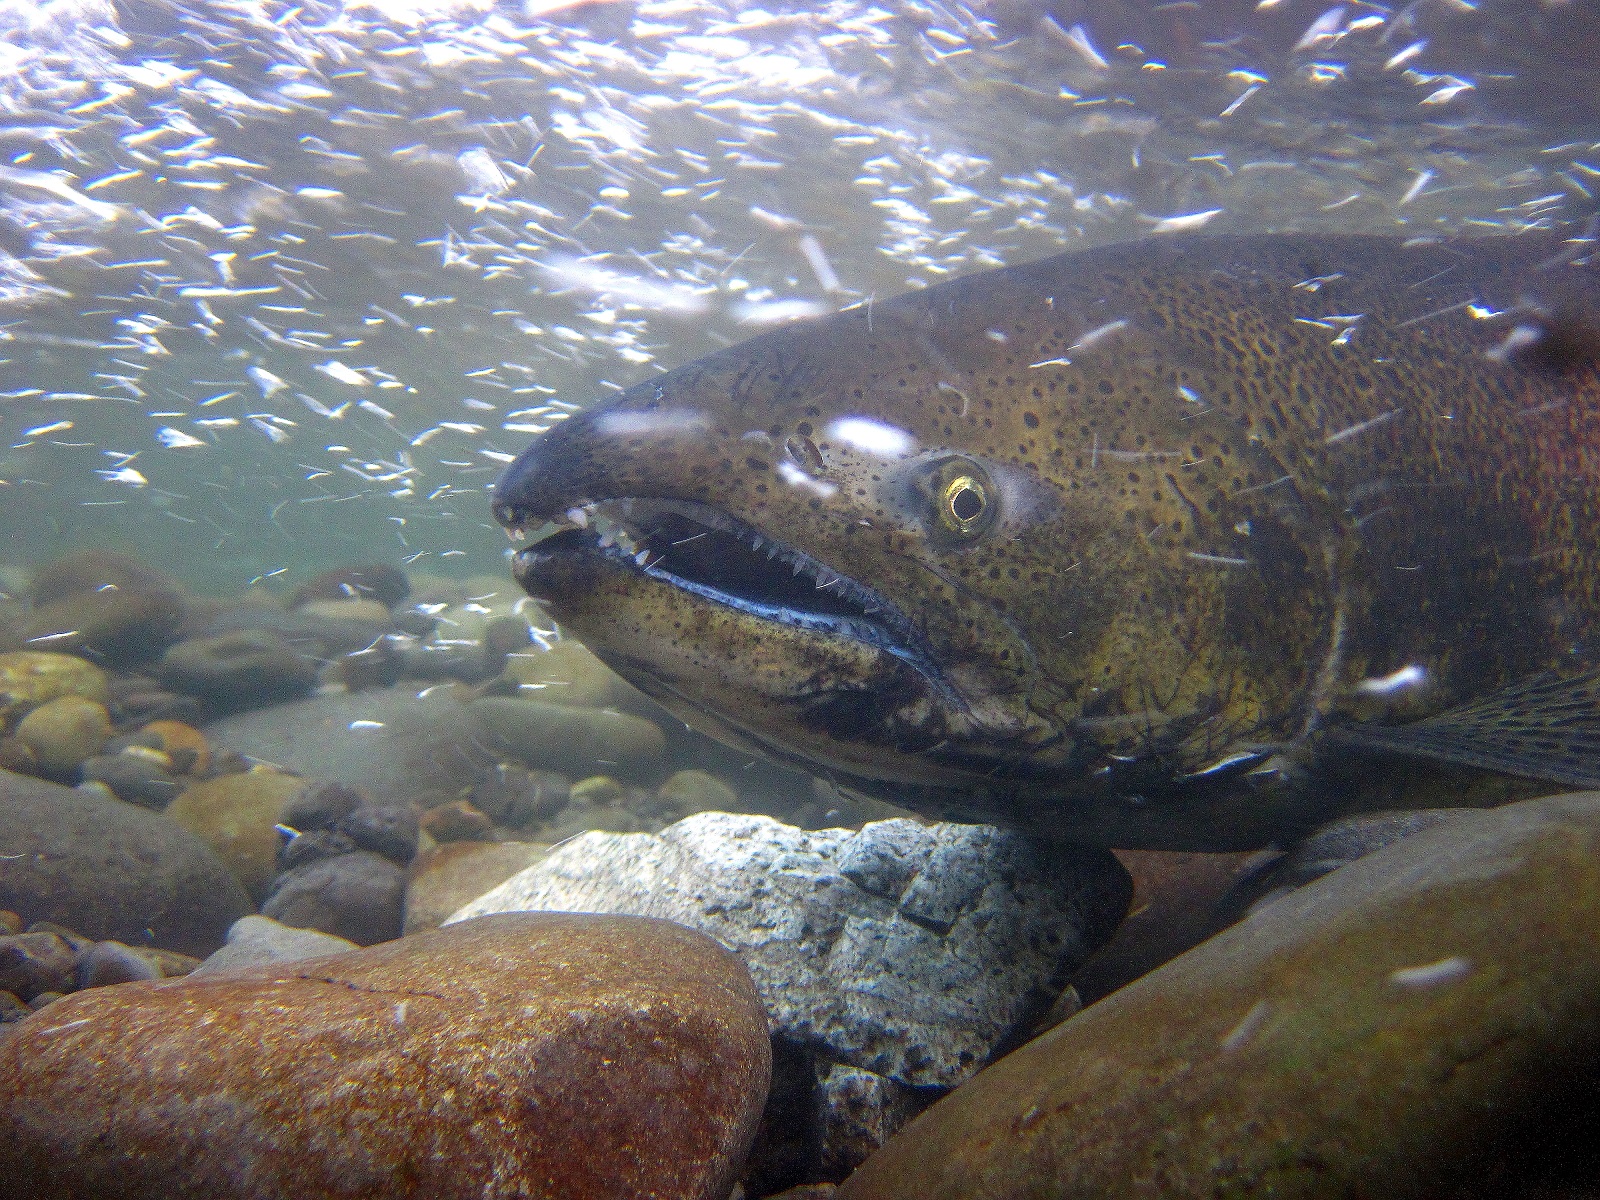 A close up of a salmon's face as it swims underwater.